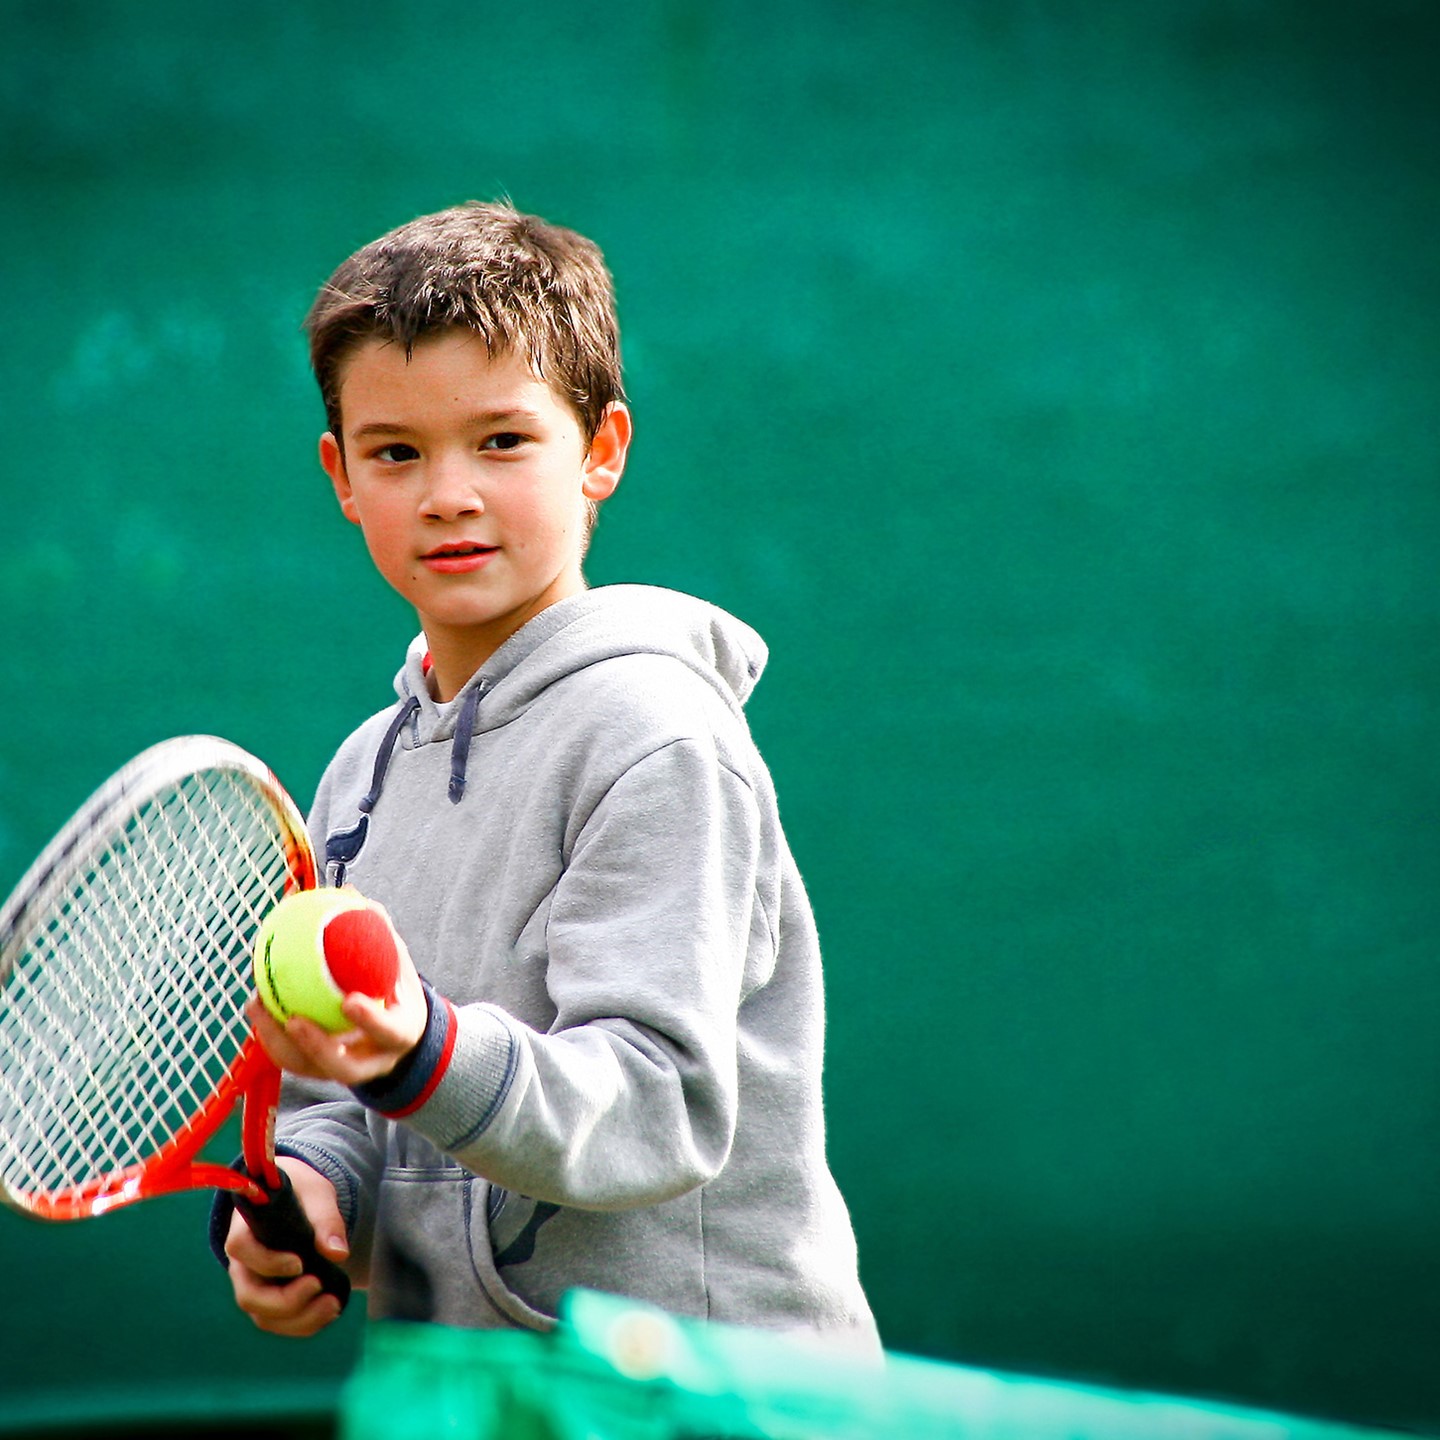 A young boy playing tennis